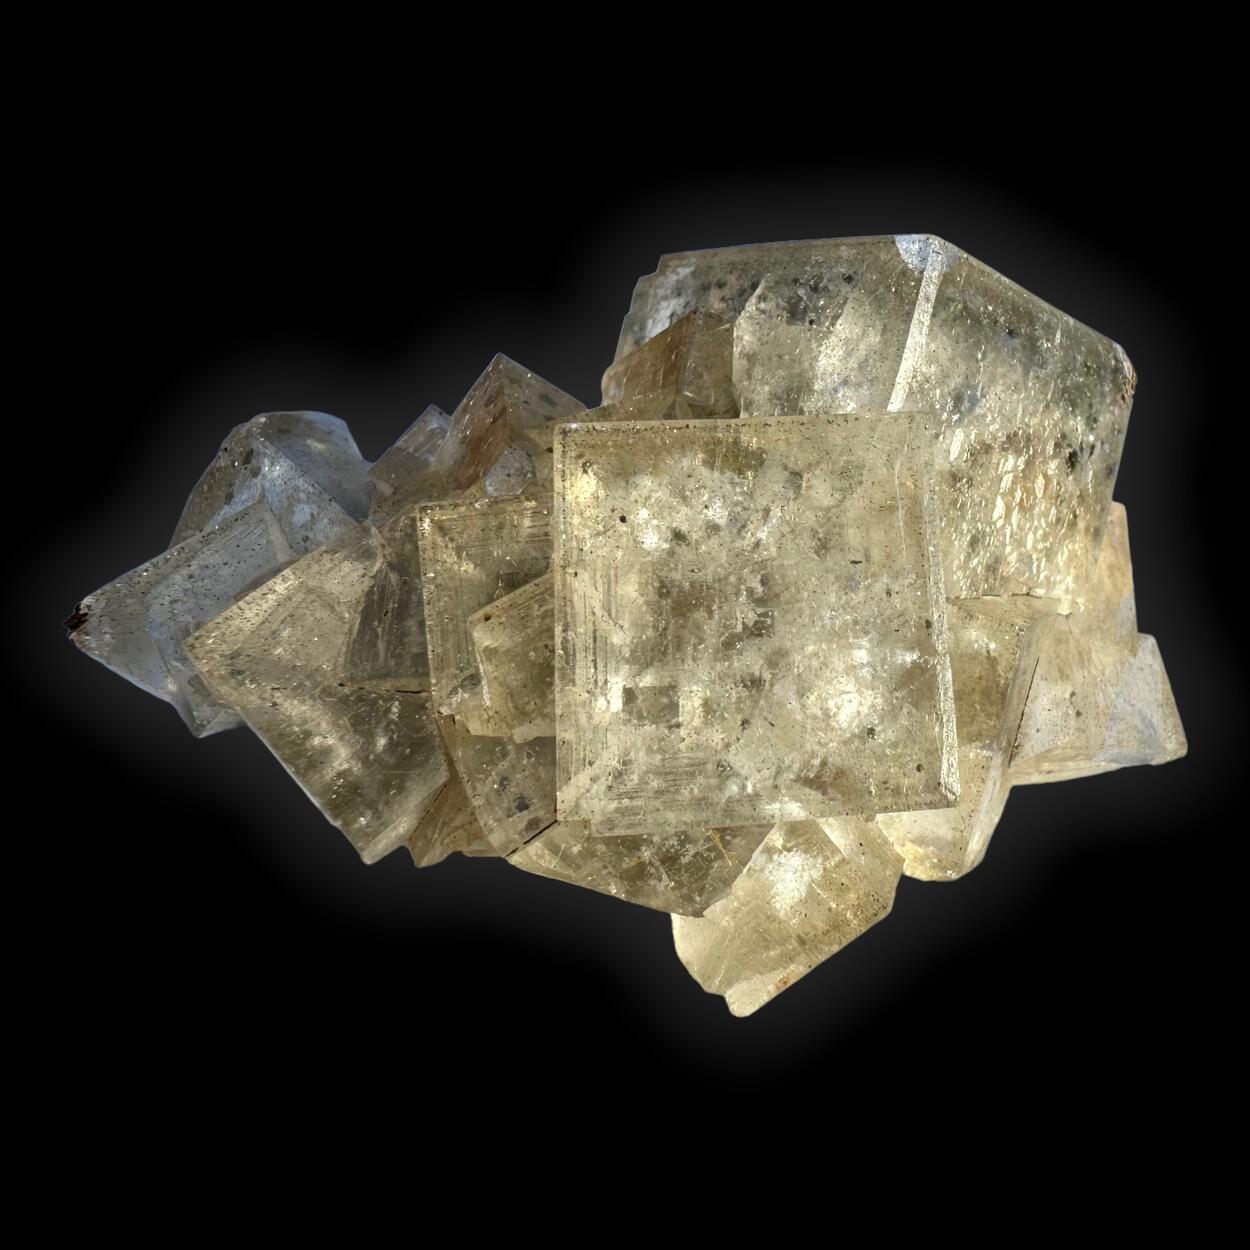 Fluorite With Marcasite Inclusions